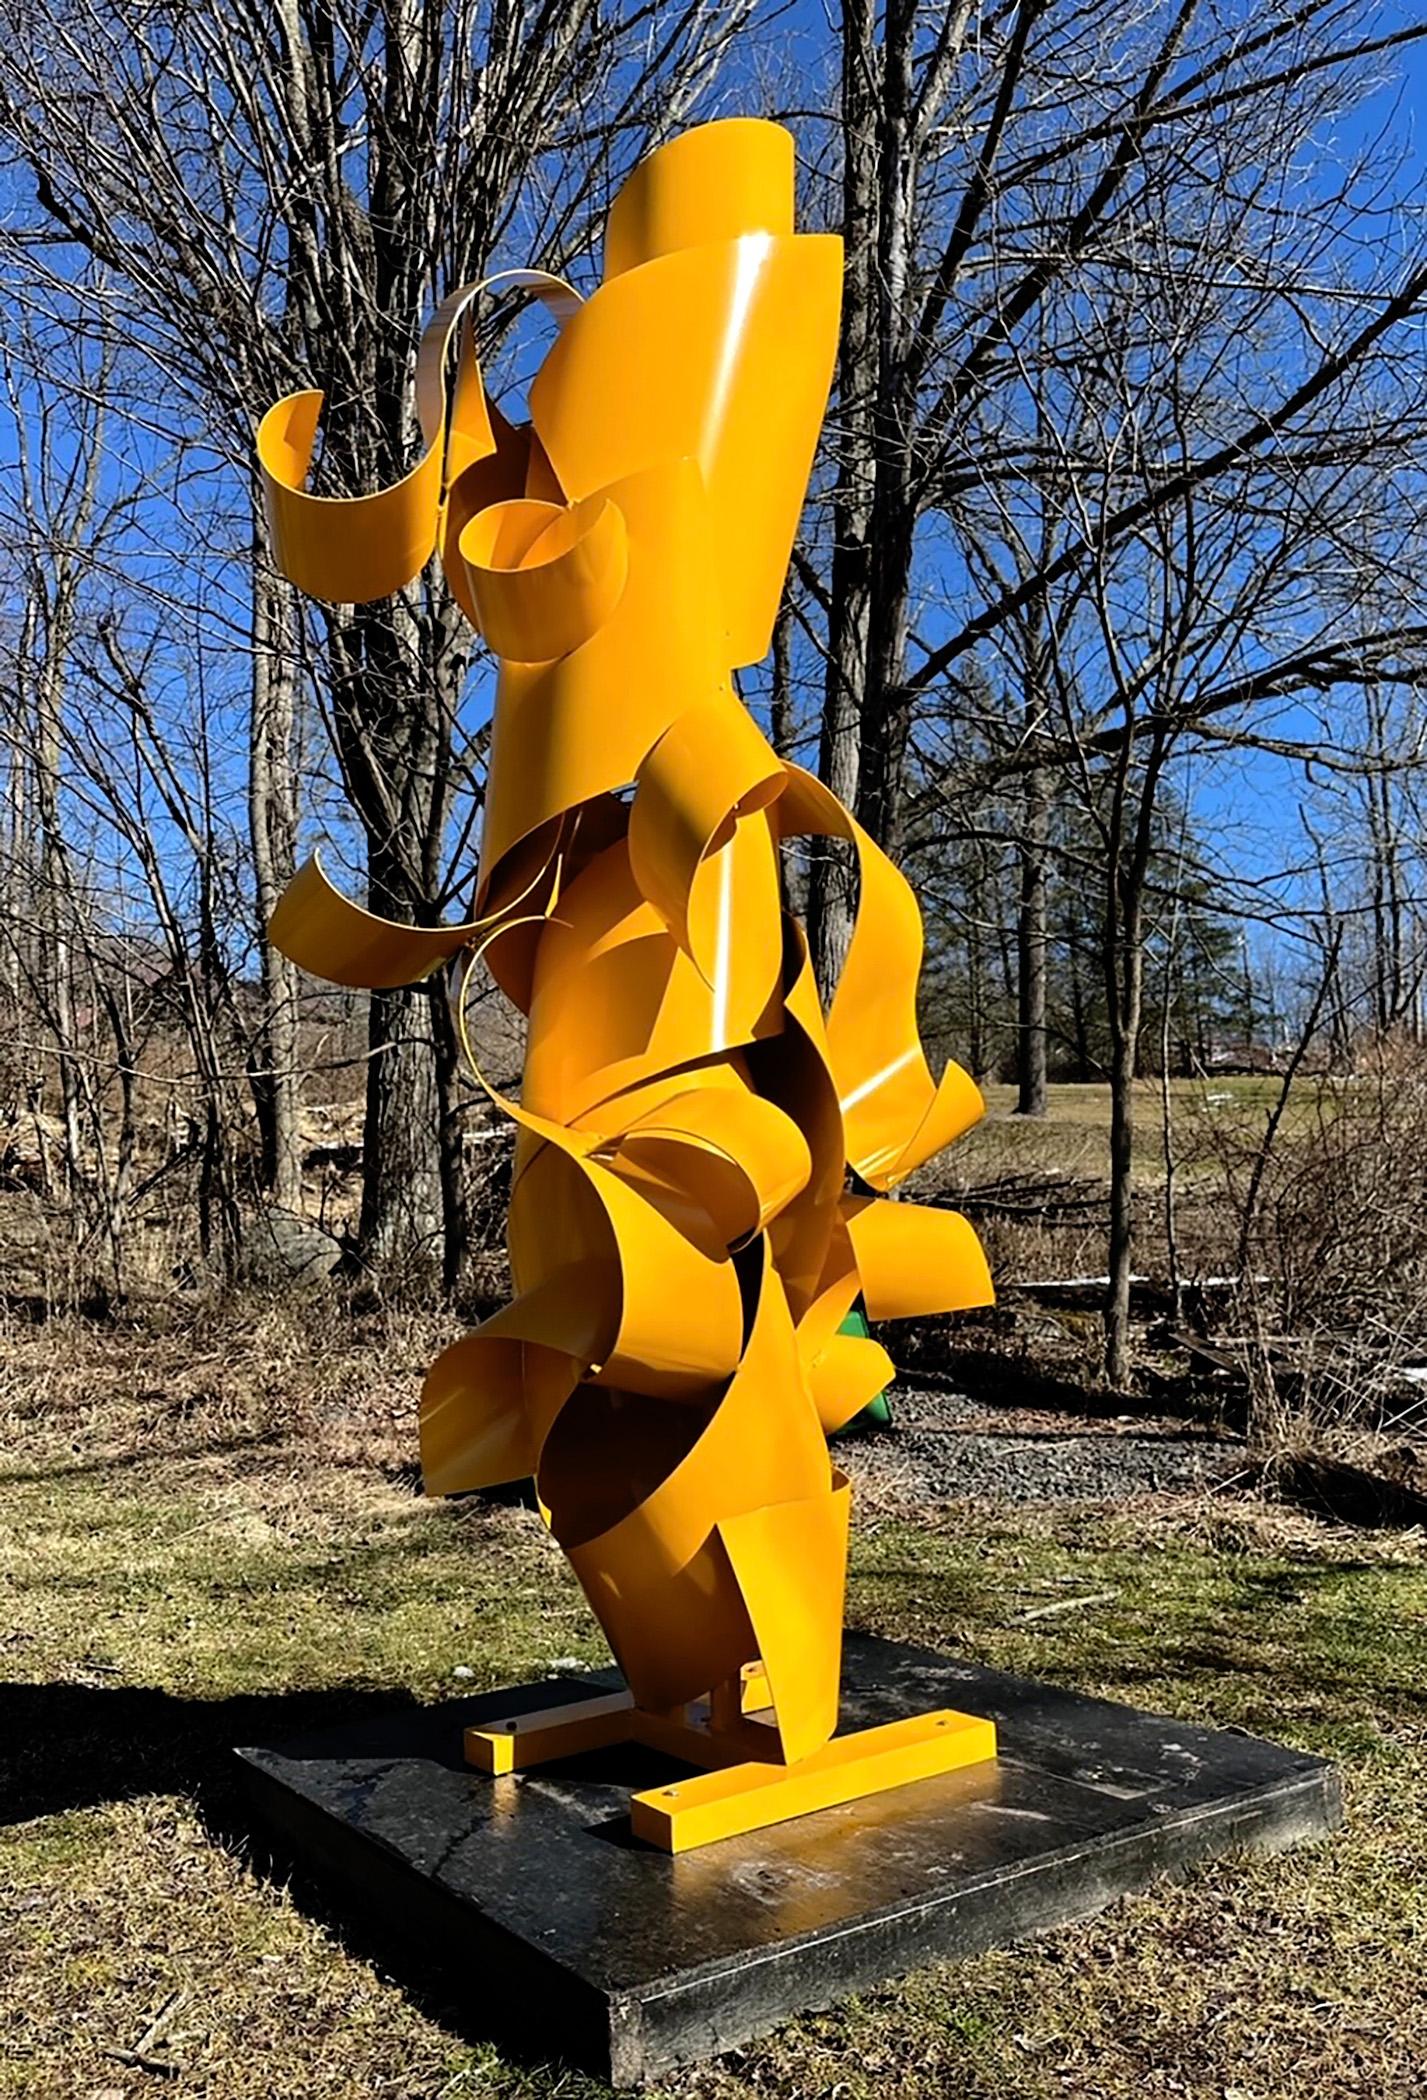 Richard Pitts Abstract Sculpture - "Dahlia" Large-Scale, Abstract Aluminum Metal Sculpture in Yellow